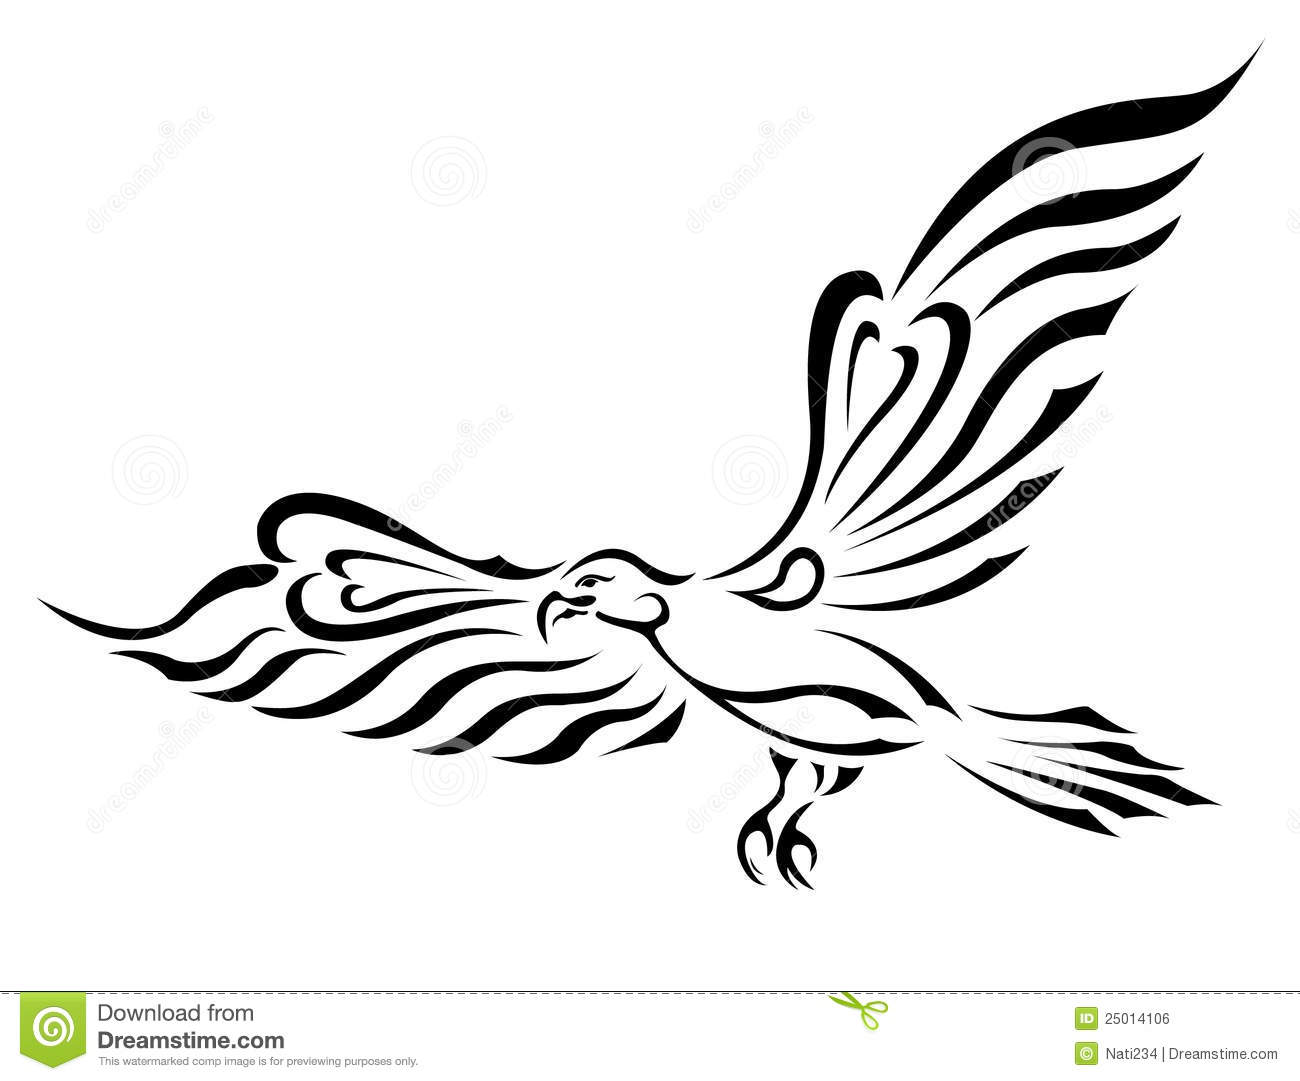 Freedom Symbol Tattoo  Flying Eagle With Big Wings Royalty Free Stock    